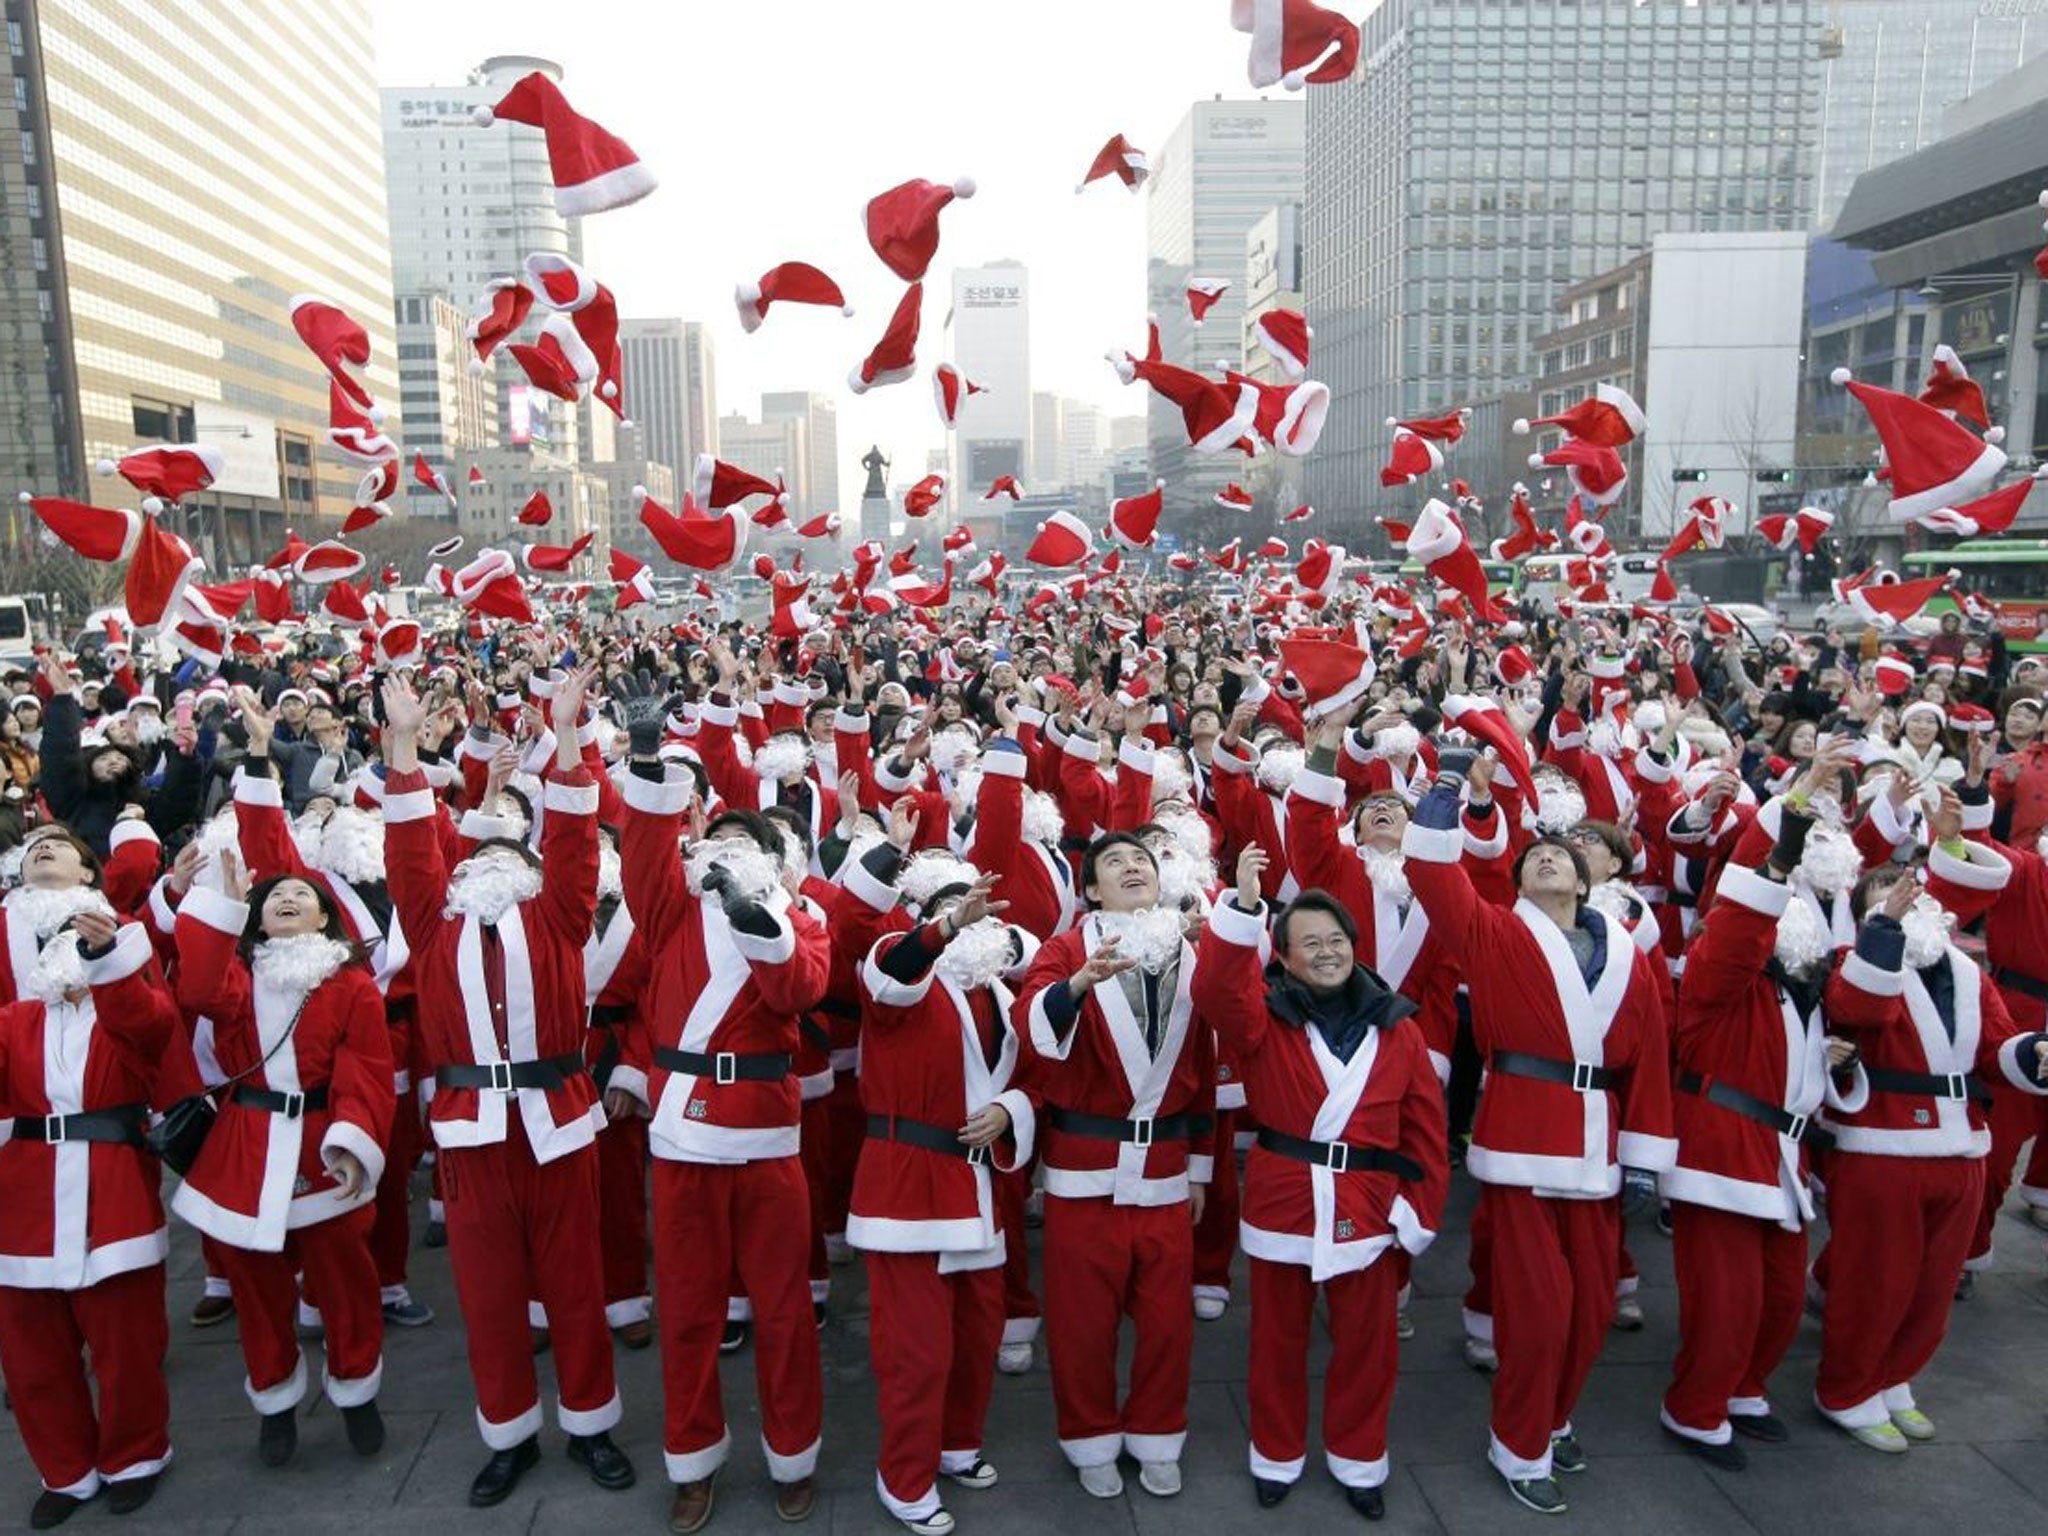 More than 1,000 volunteers clad in Santa Claus costumes throw their hats in the air as they gather to deliver gifts for the poor in downtown Seoul